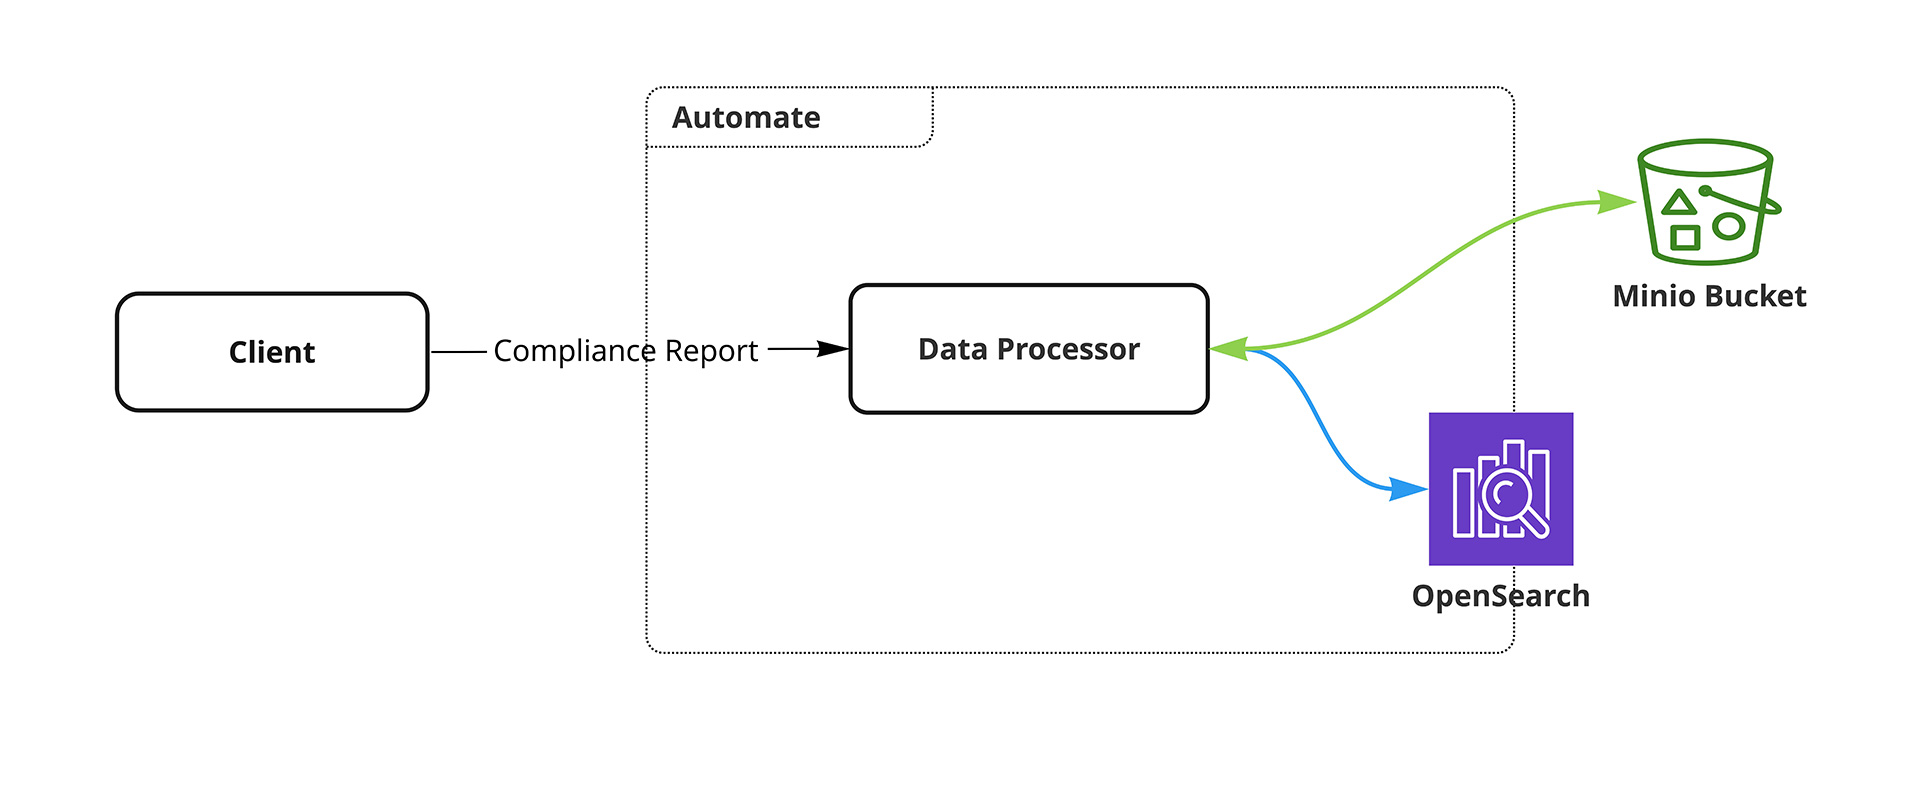 Diagram of how Chef Automate enables ingestion and management of large compliance reports